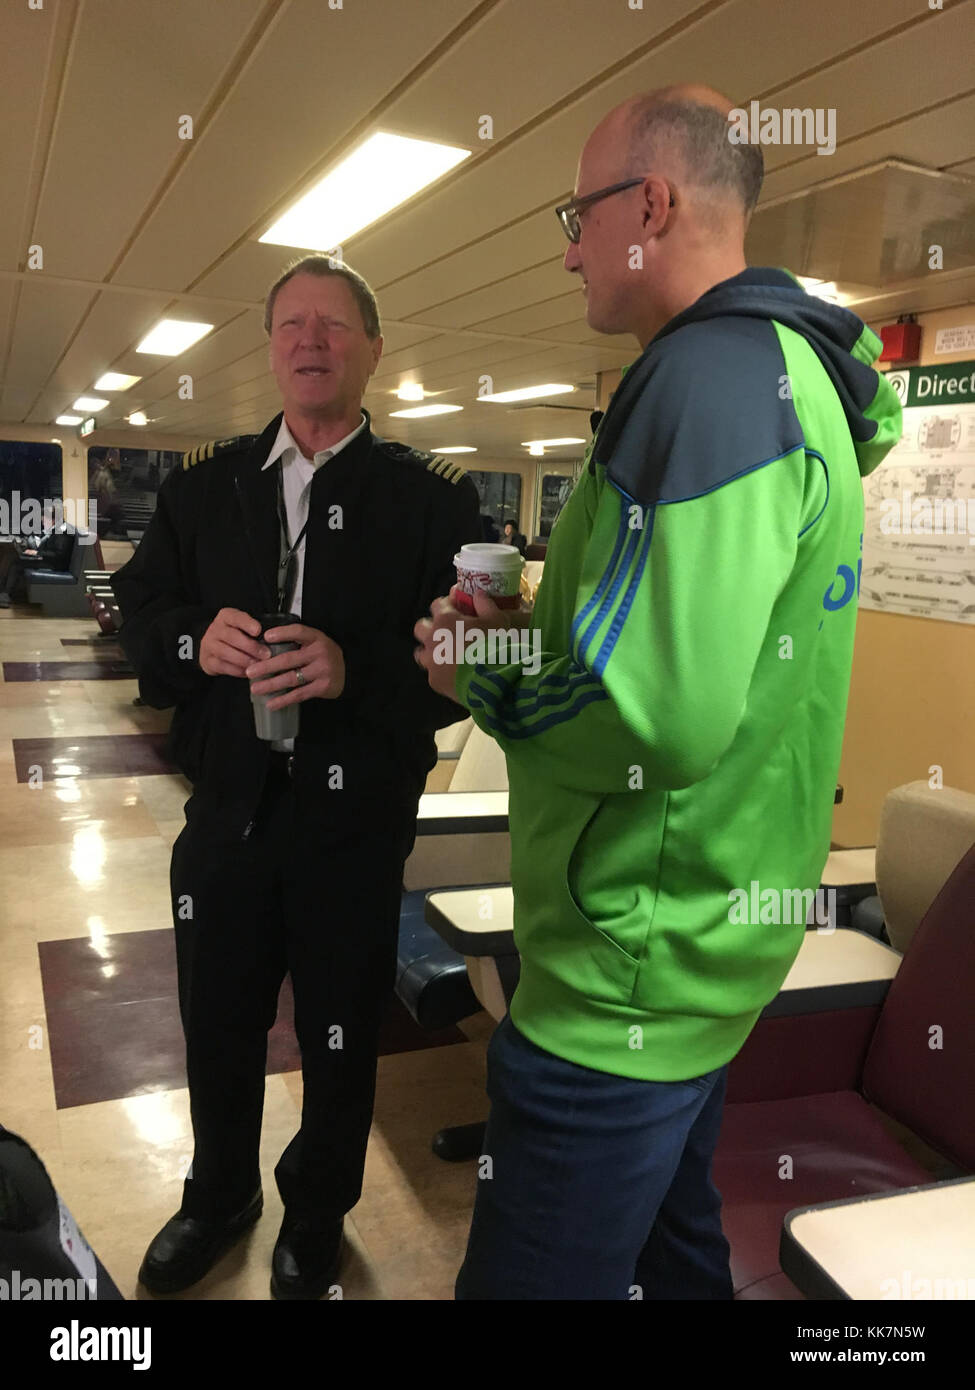 Capt. Fee of our ferry Wenatchee and Sounders legend Kasey Keller chat Thursday during the Bainbridge Island-Seattle run. Sharing stories 38118274241 o Stock Photo